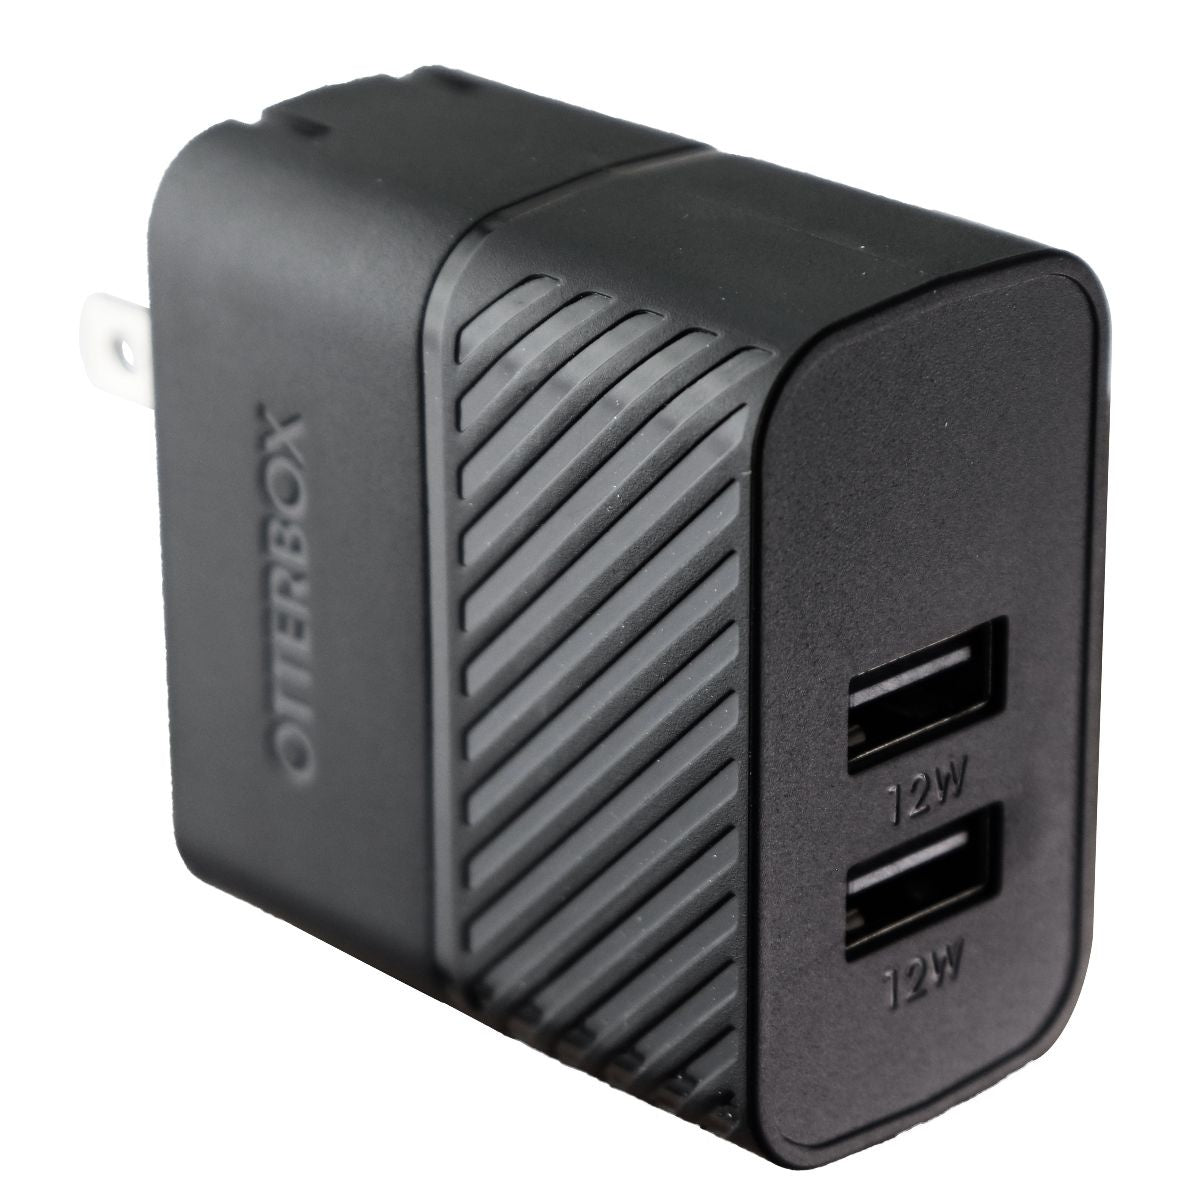 OtterBox Fast Charge Dual USB Port Wall Charger (12W and 12W) - Black Shimmer